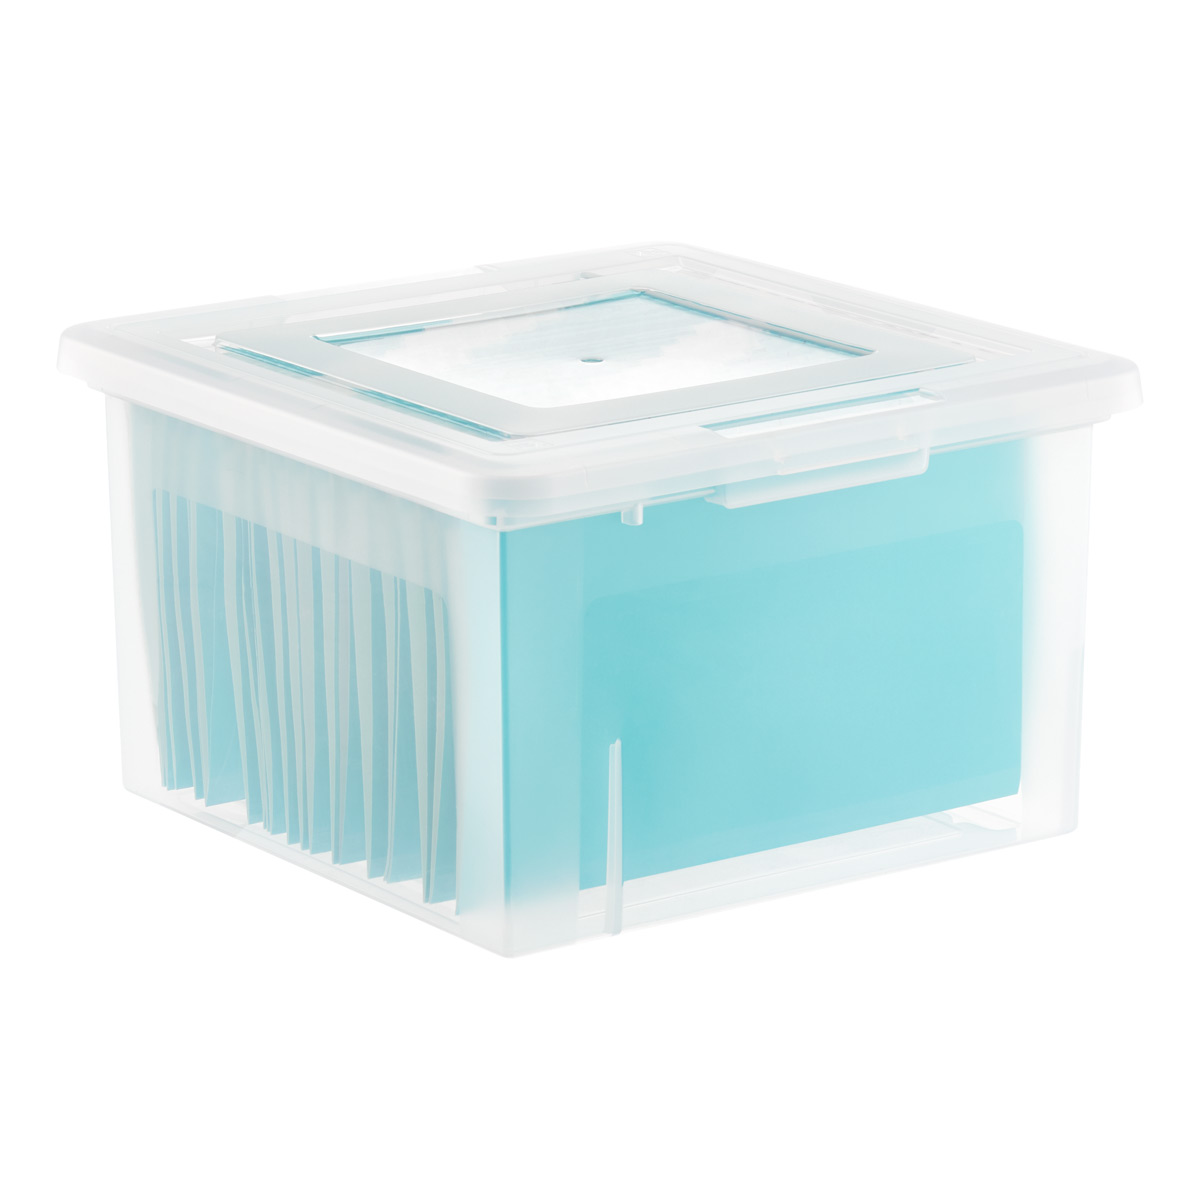 Iris Letter/Legal File Box | The Container Store